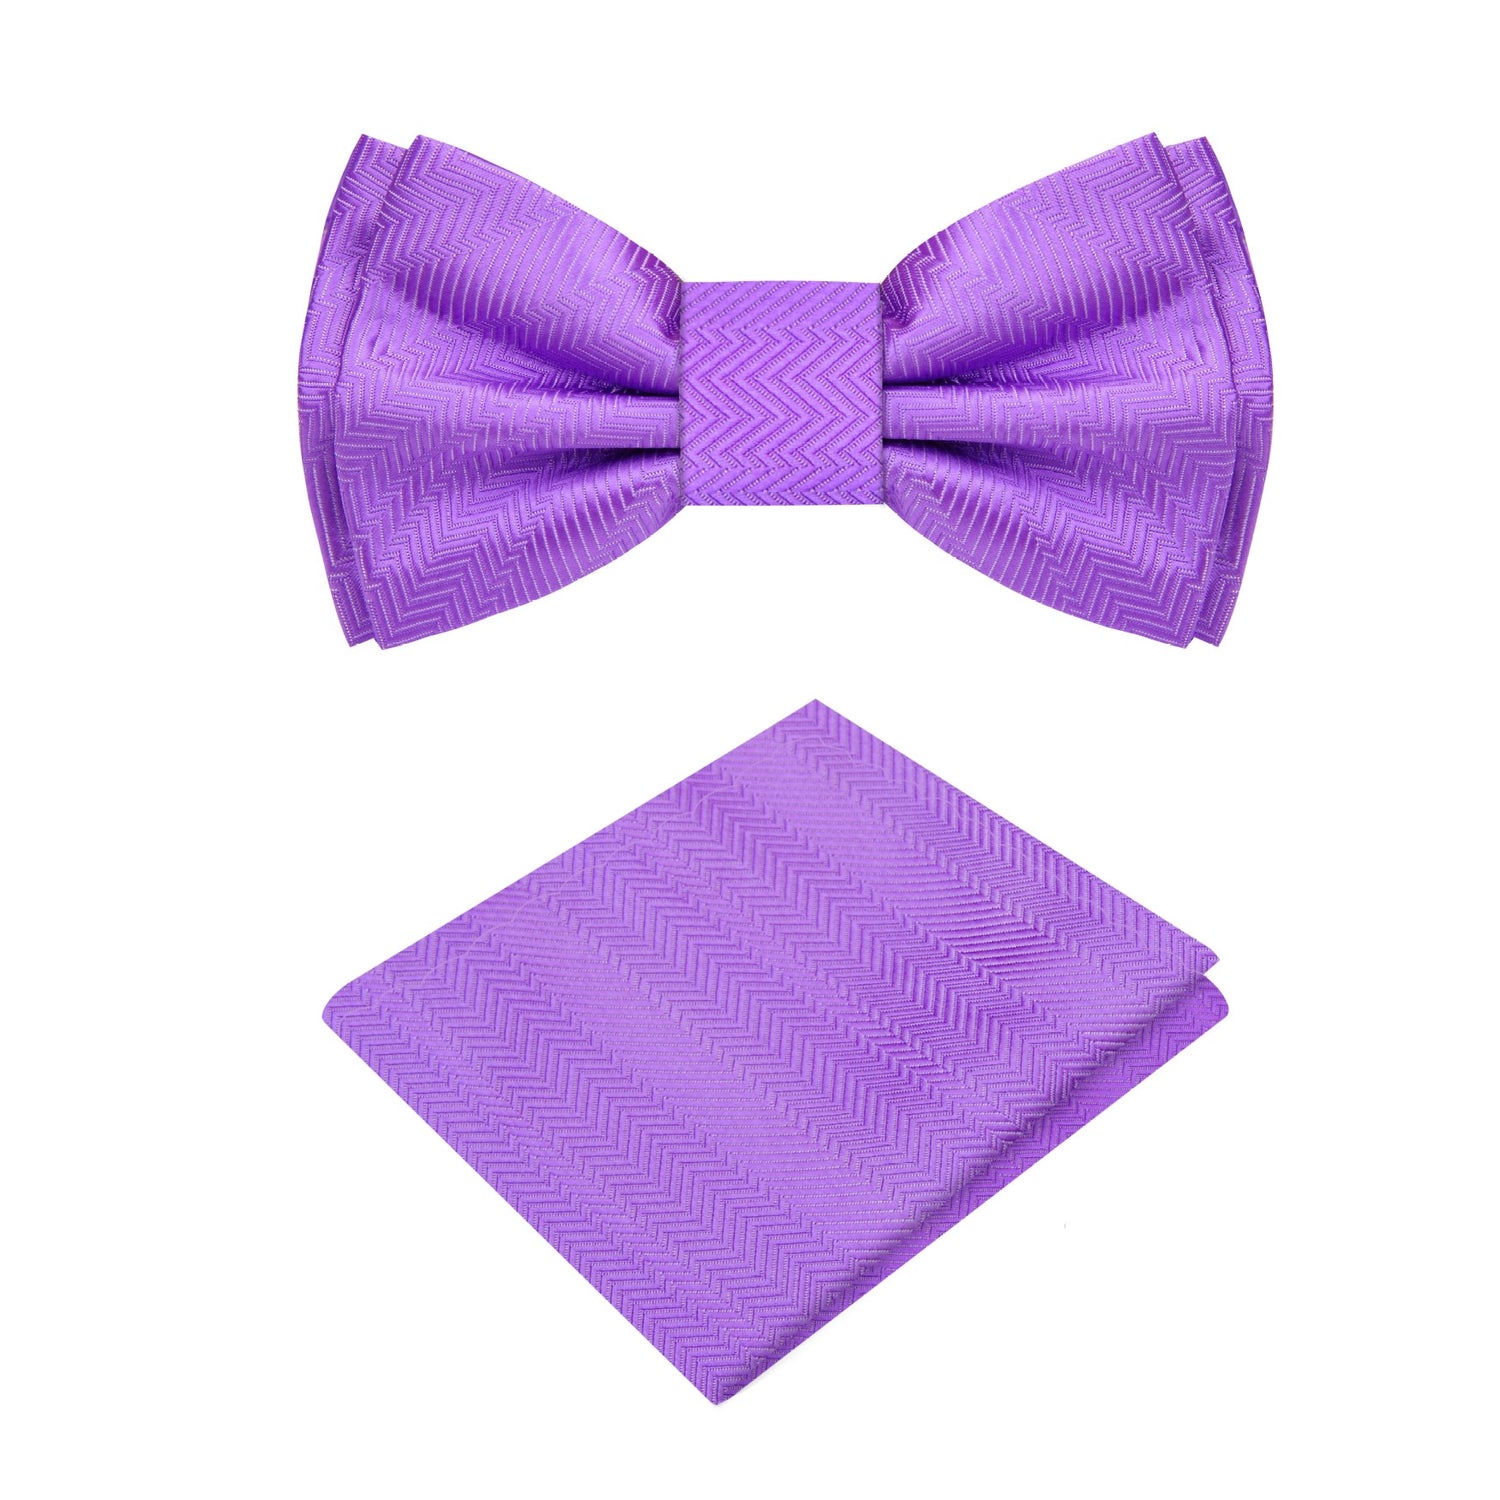 An Amethyst Purple Solid Pattern Self Tie Bow Tie, Matching Pocket Square